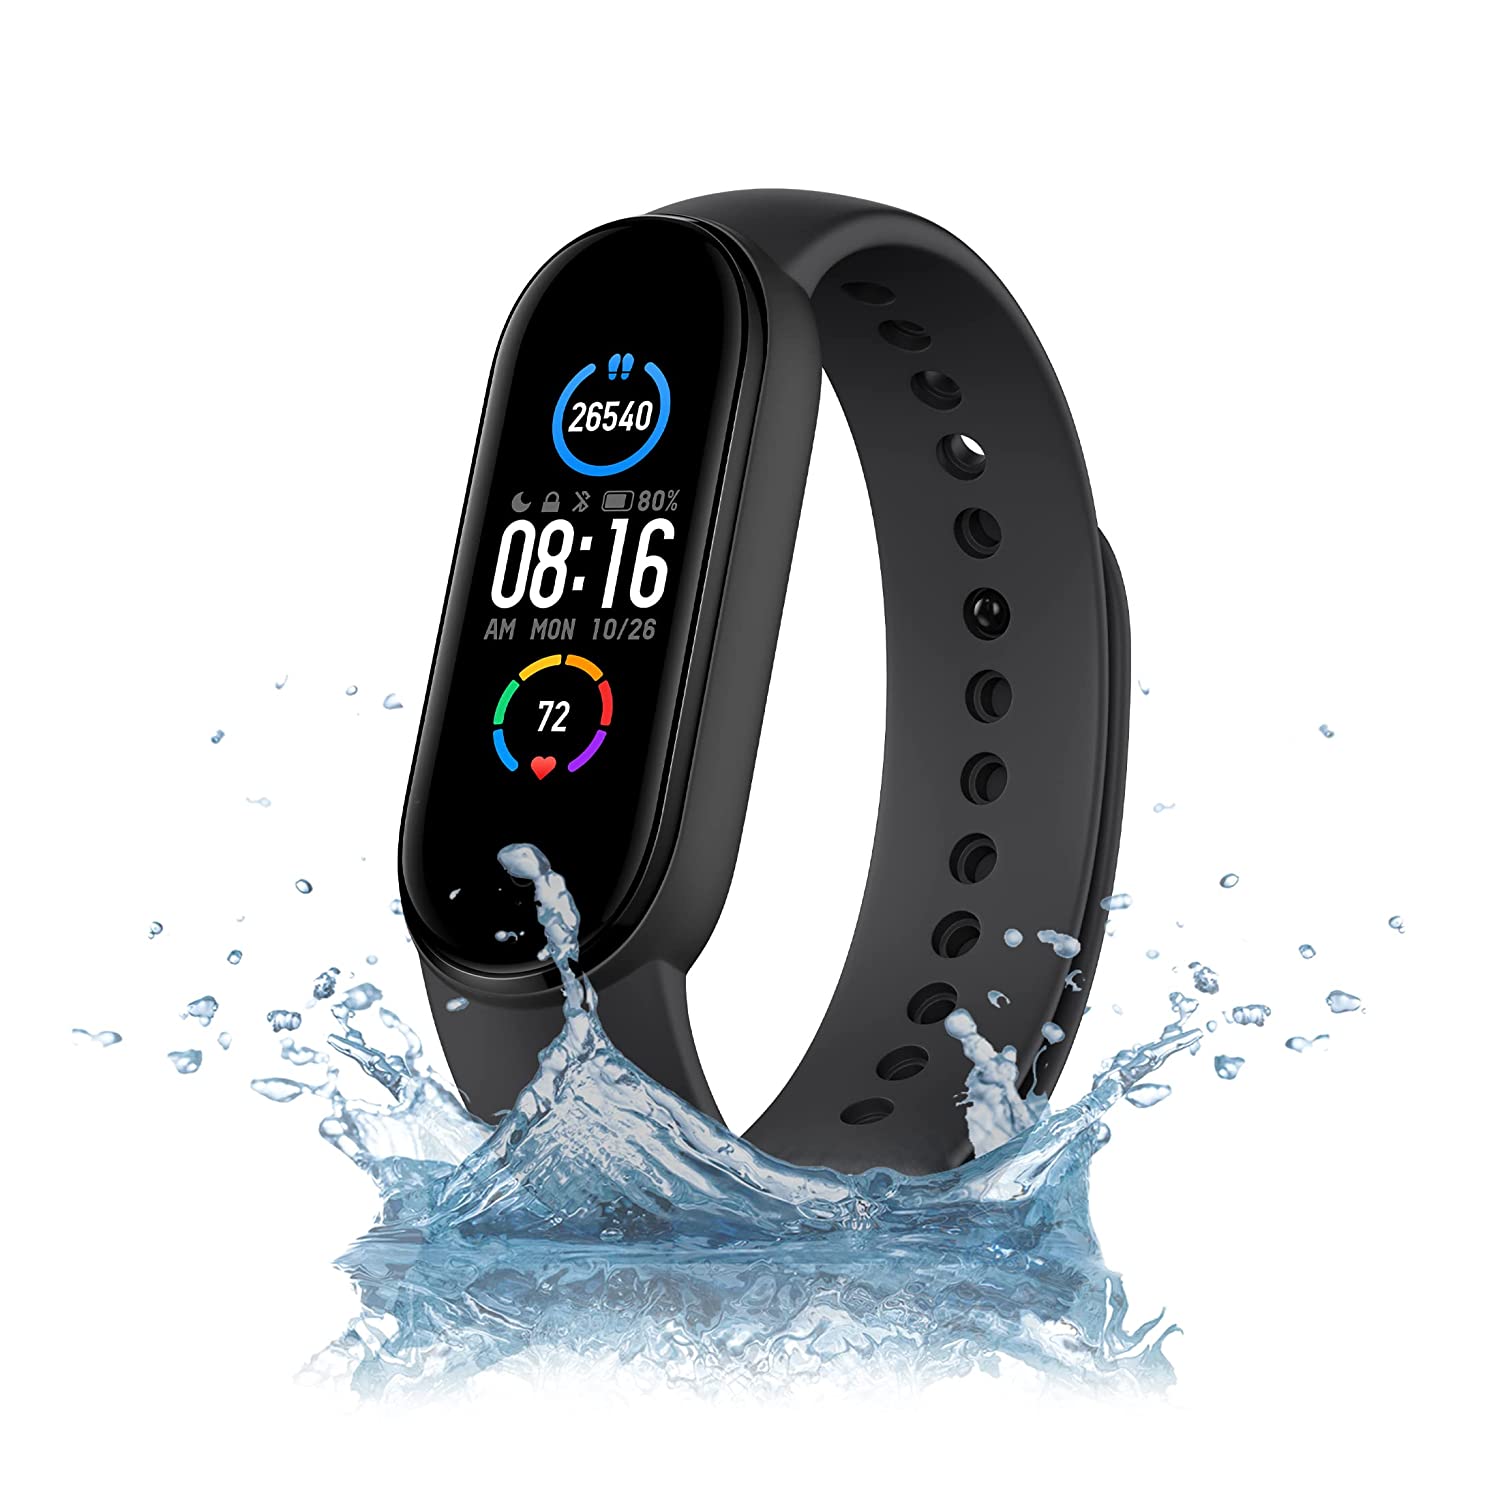 Open Box, Unused MI Smart Band 5- India's No. 1 Fitness Band, 1.1" (2.8 cm) AMOLED Color Display, 2 Weeks Battery Life